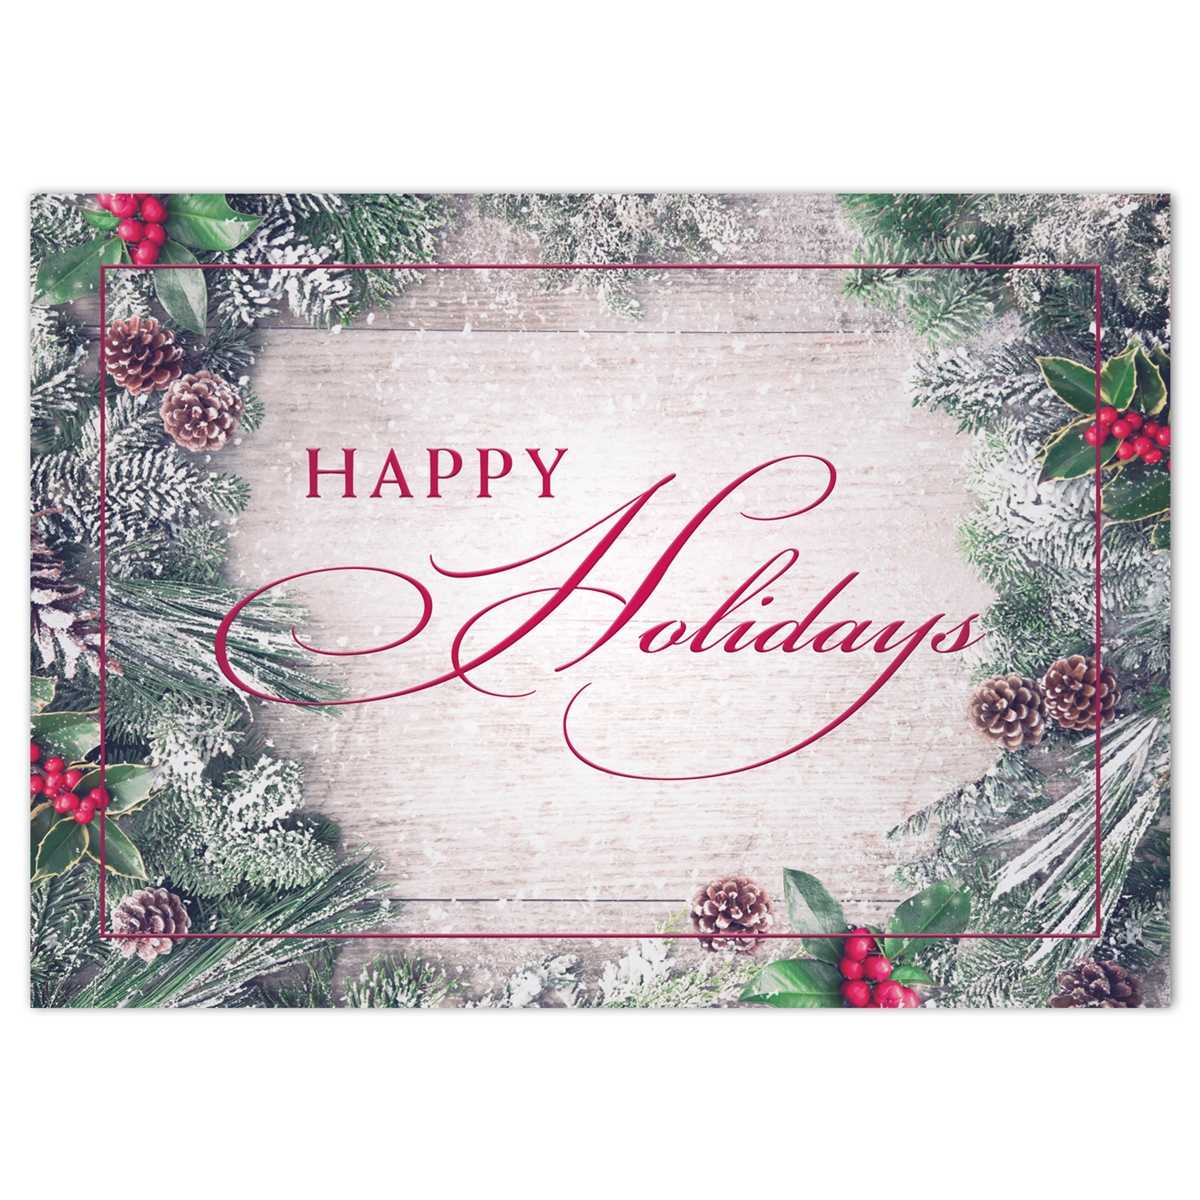 Berries, Holly and Shrubs Holiday Cards